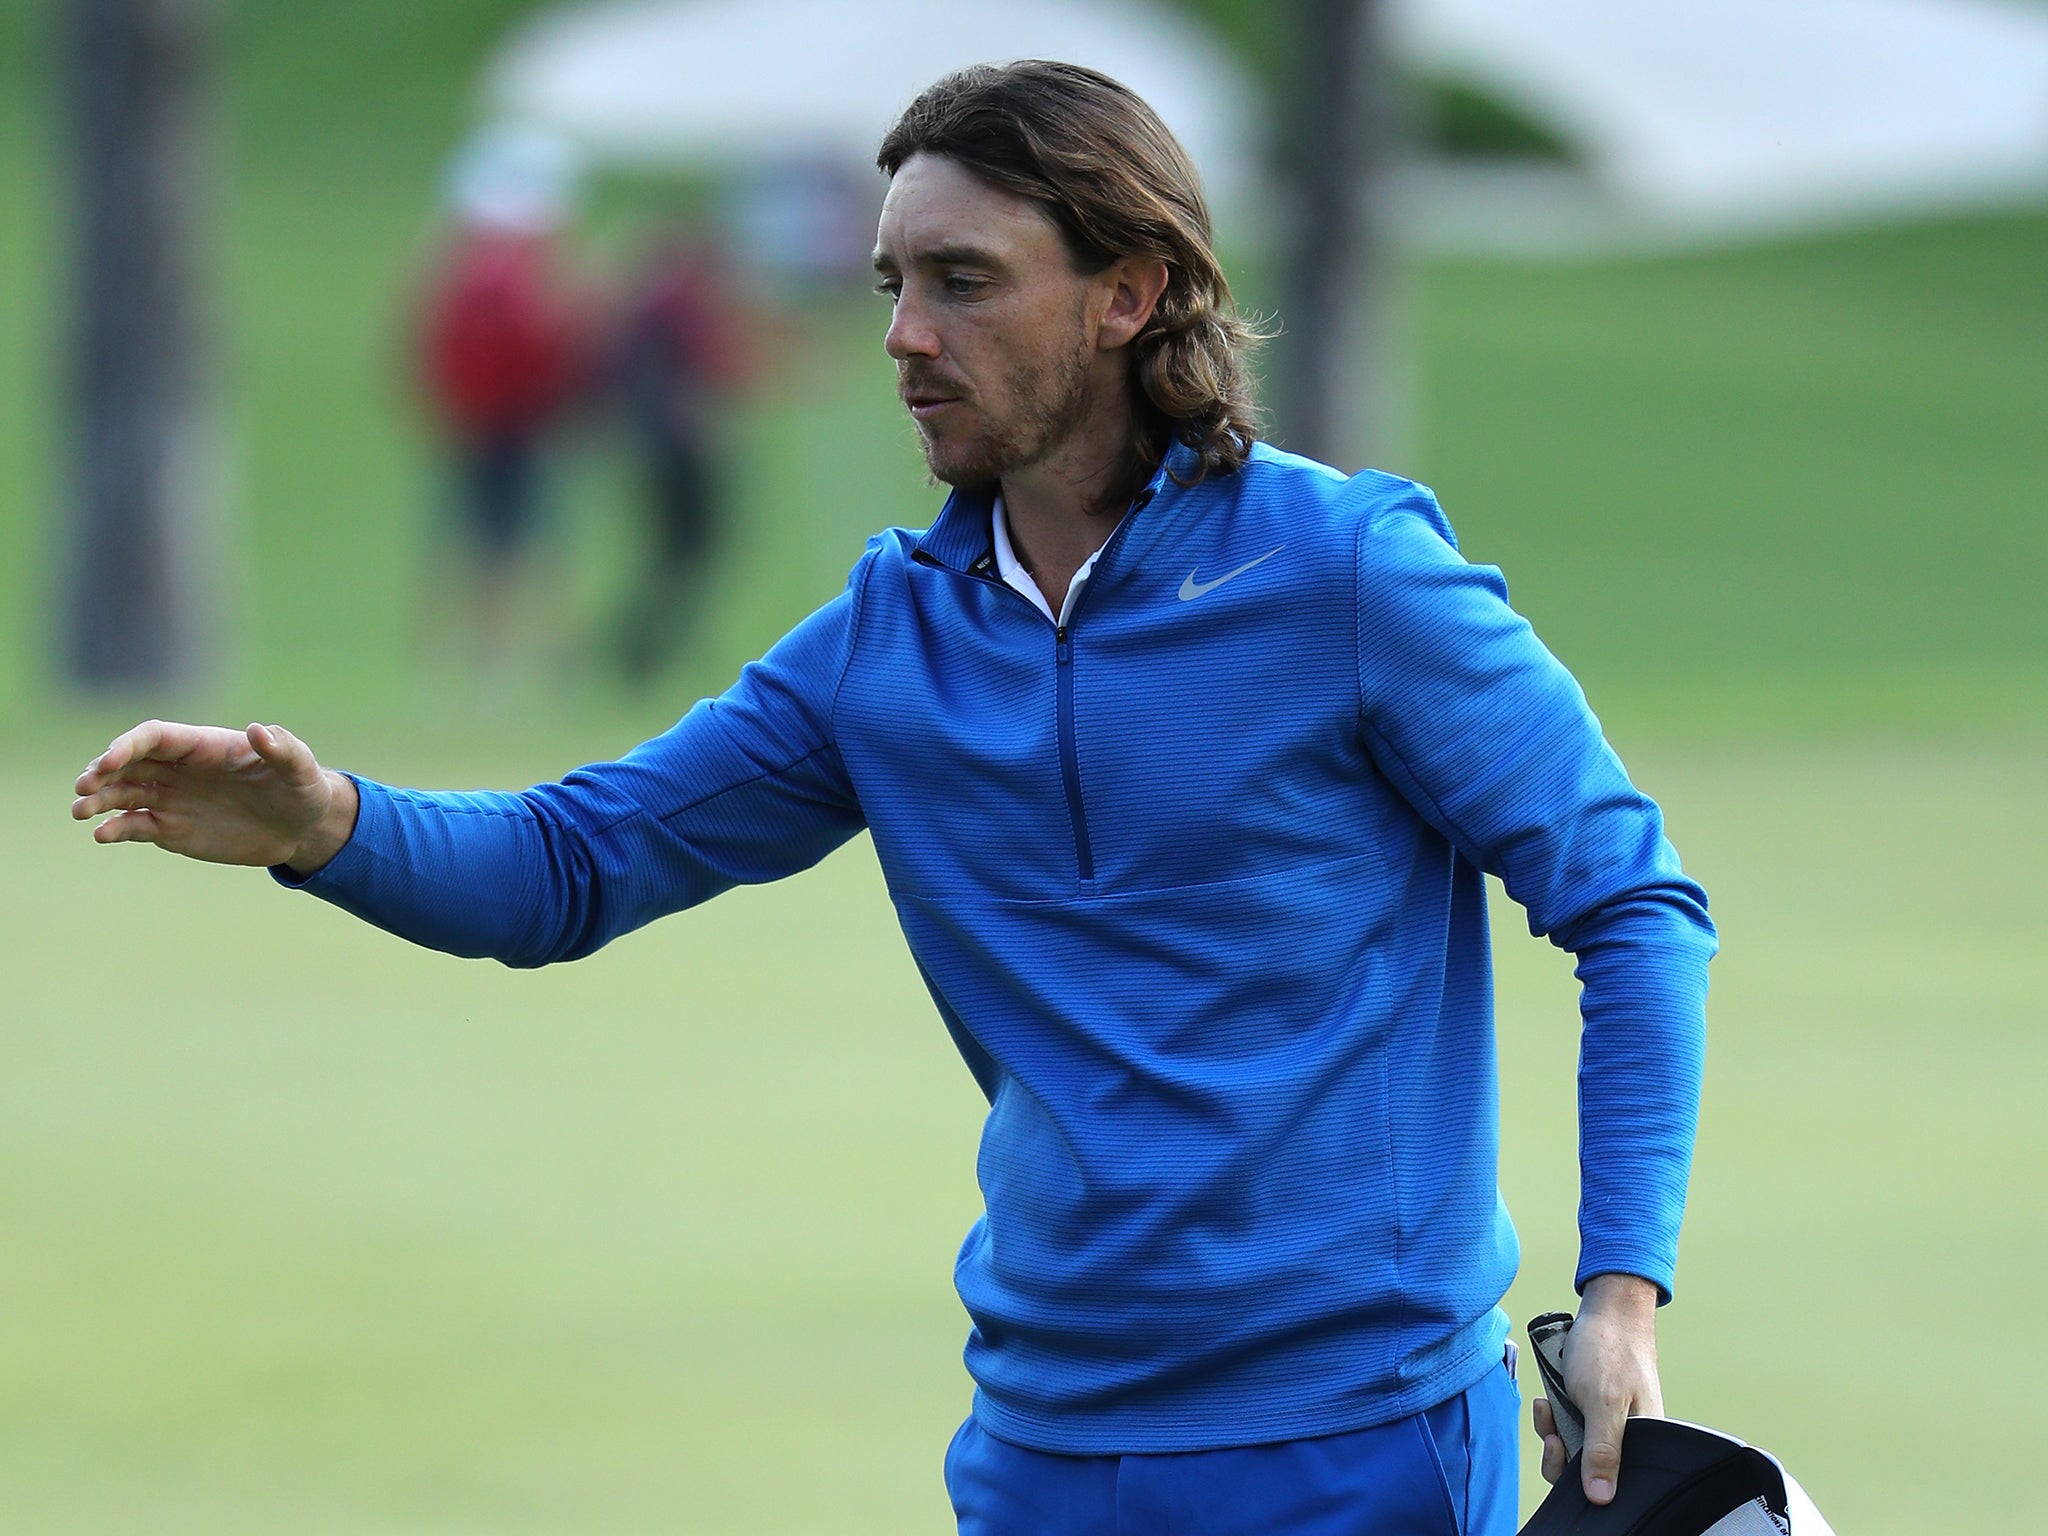 Fleetwood's lead in the Race to Dubai has been cut to 135,000 points